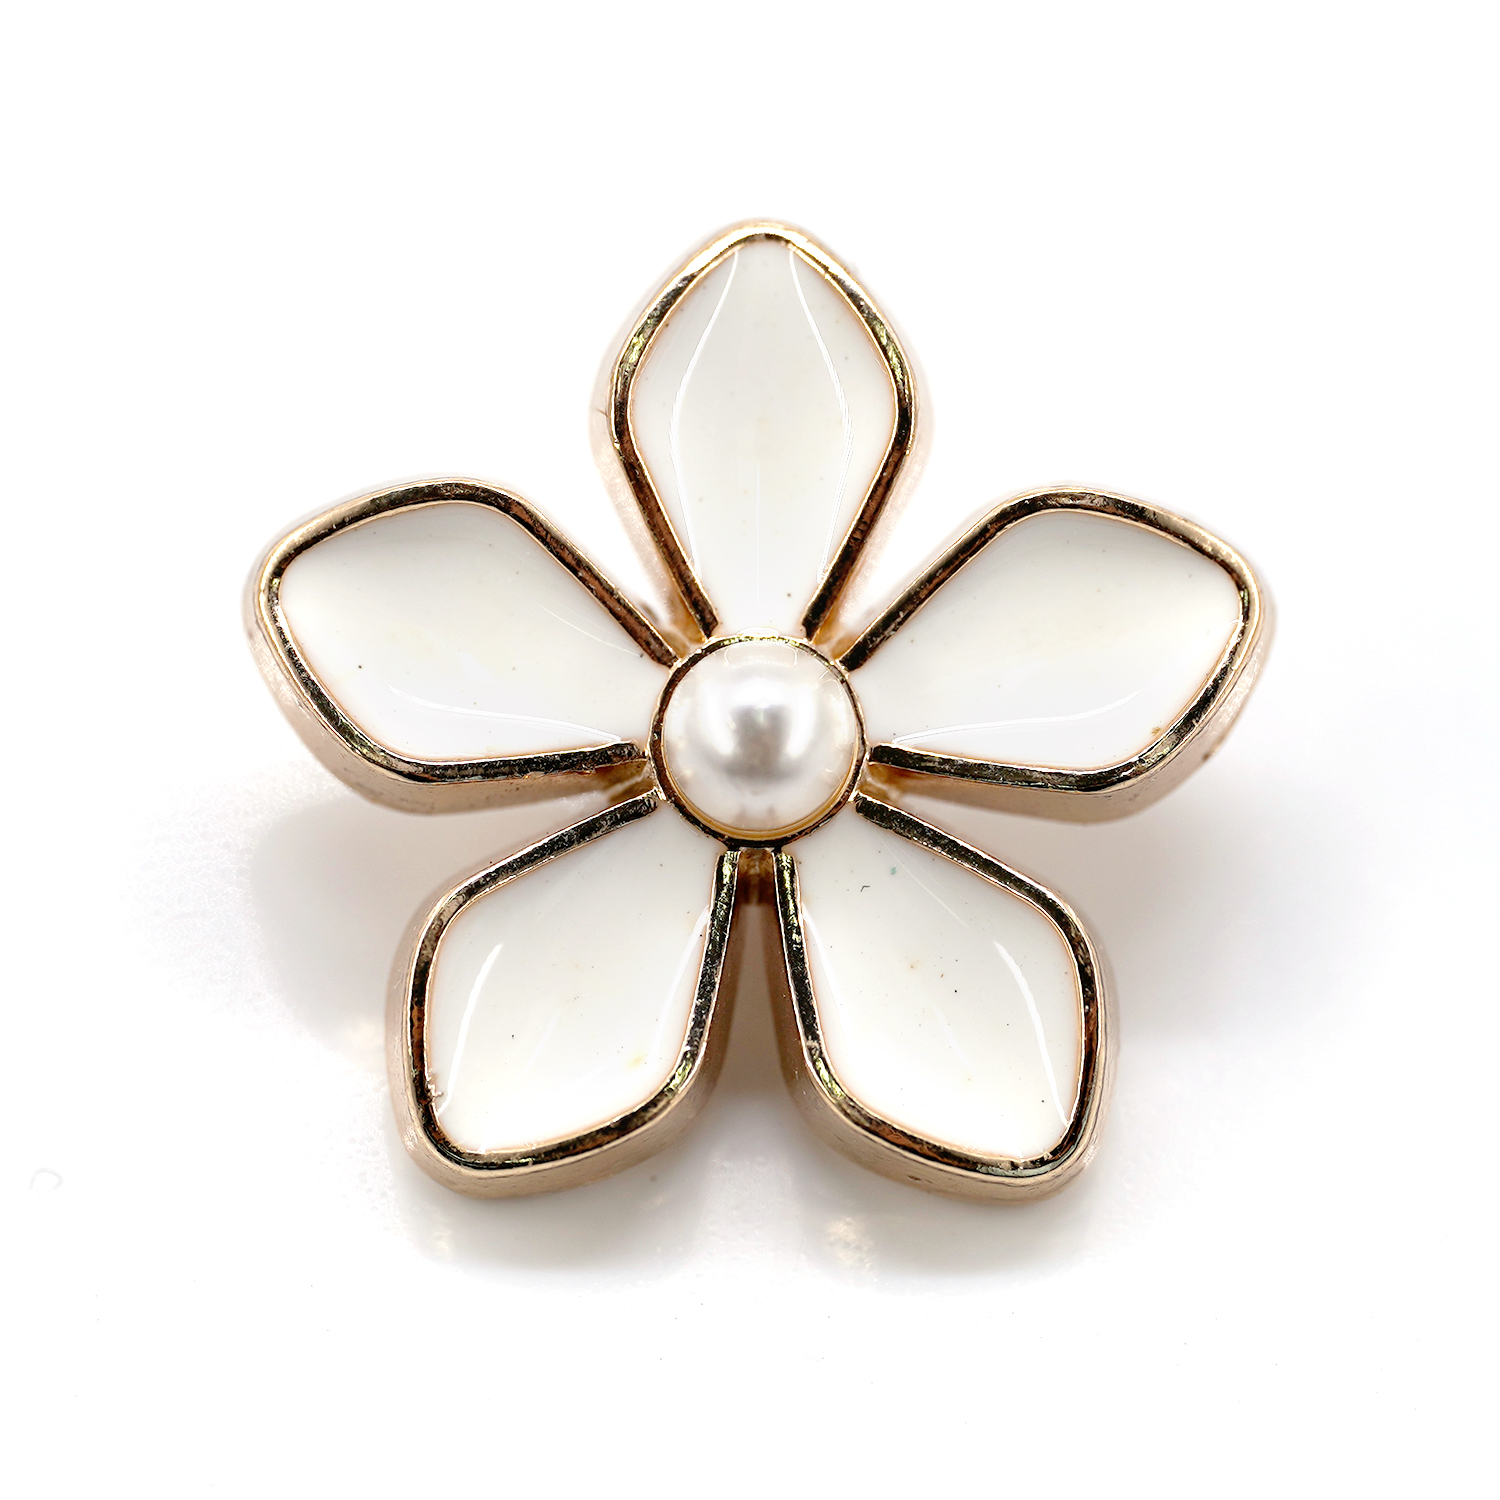 Craftisum 20 pcs White Enamel Plumeria Metal Sewing Shank Buttons for Coats -23mm -7/8"